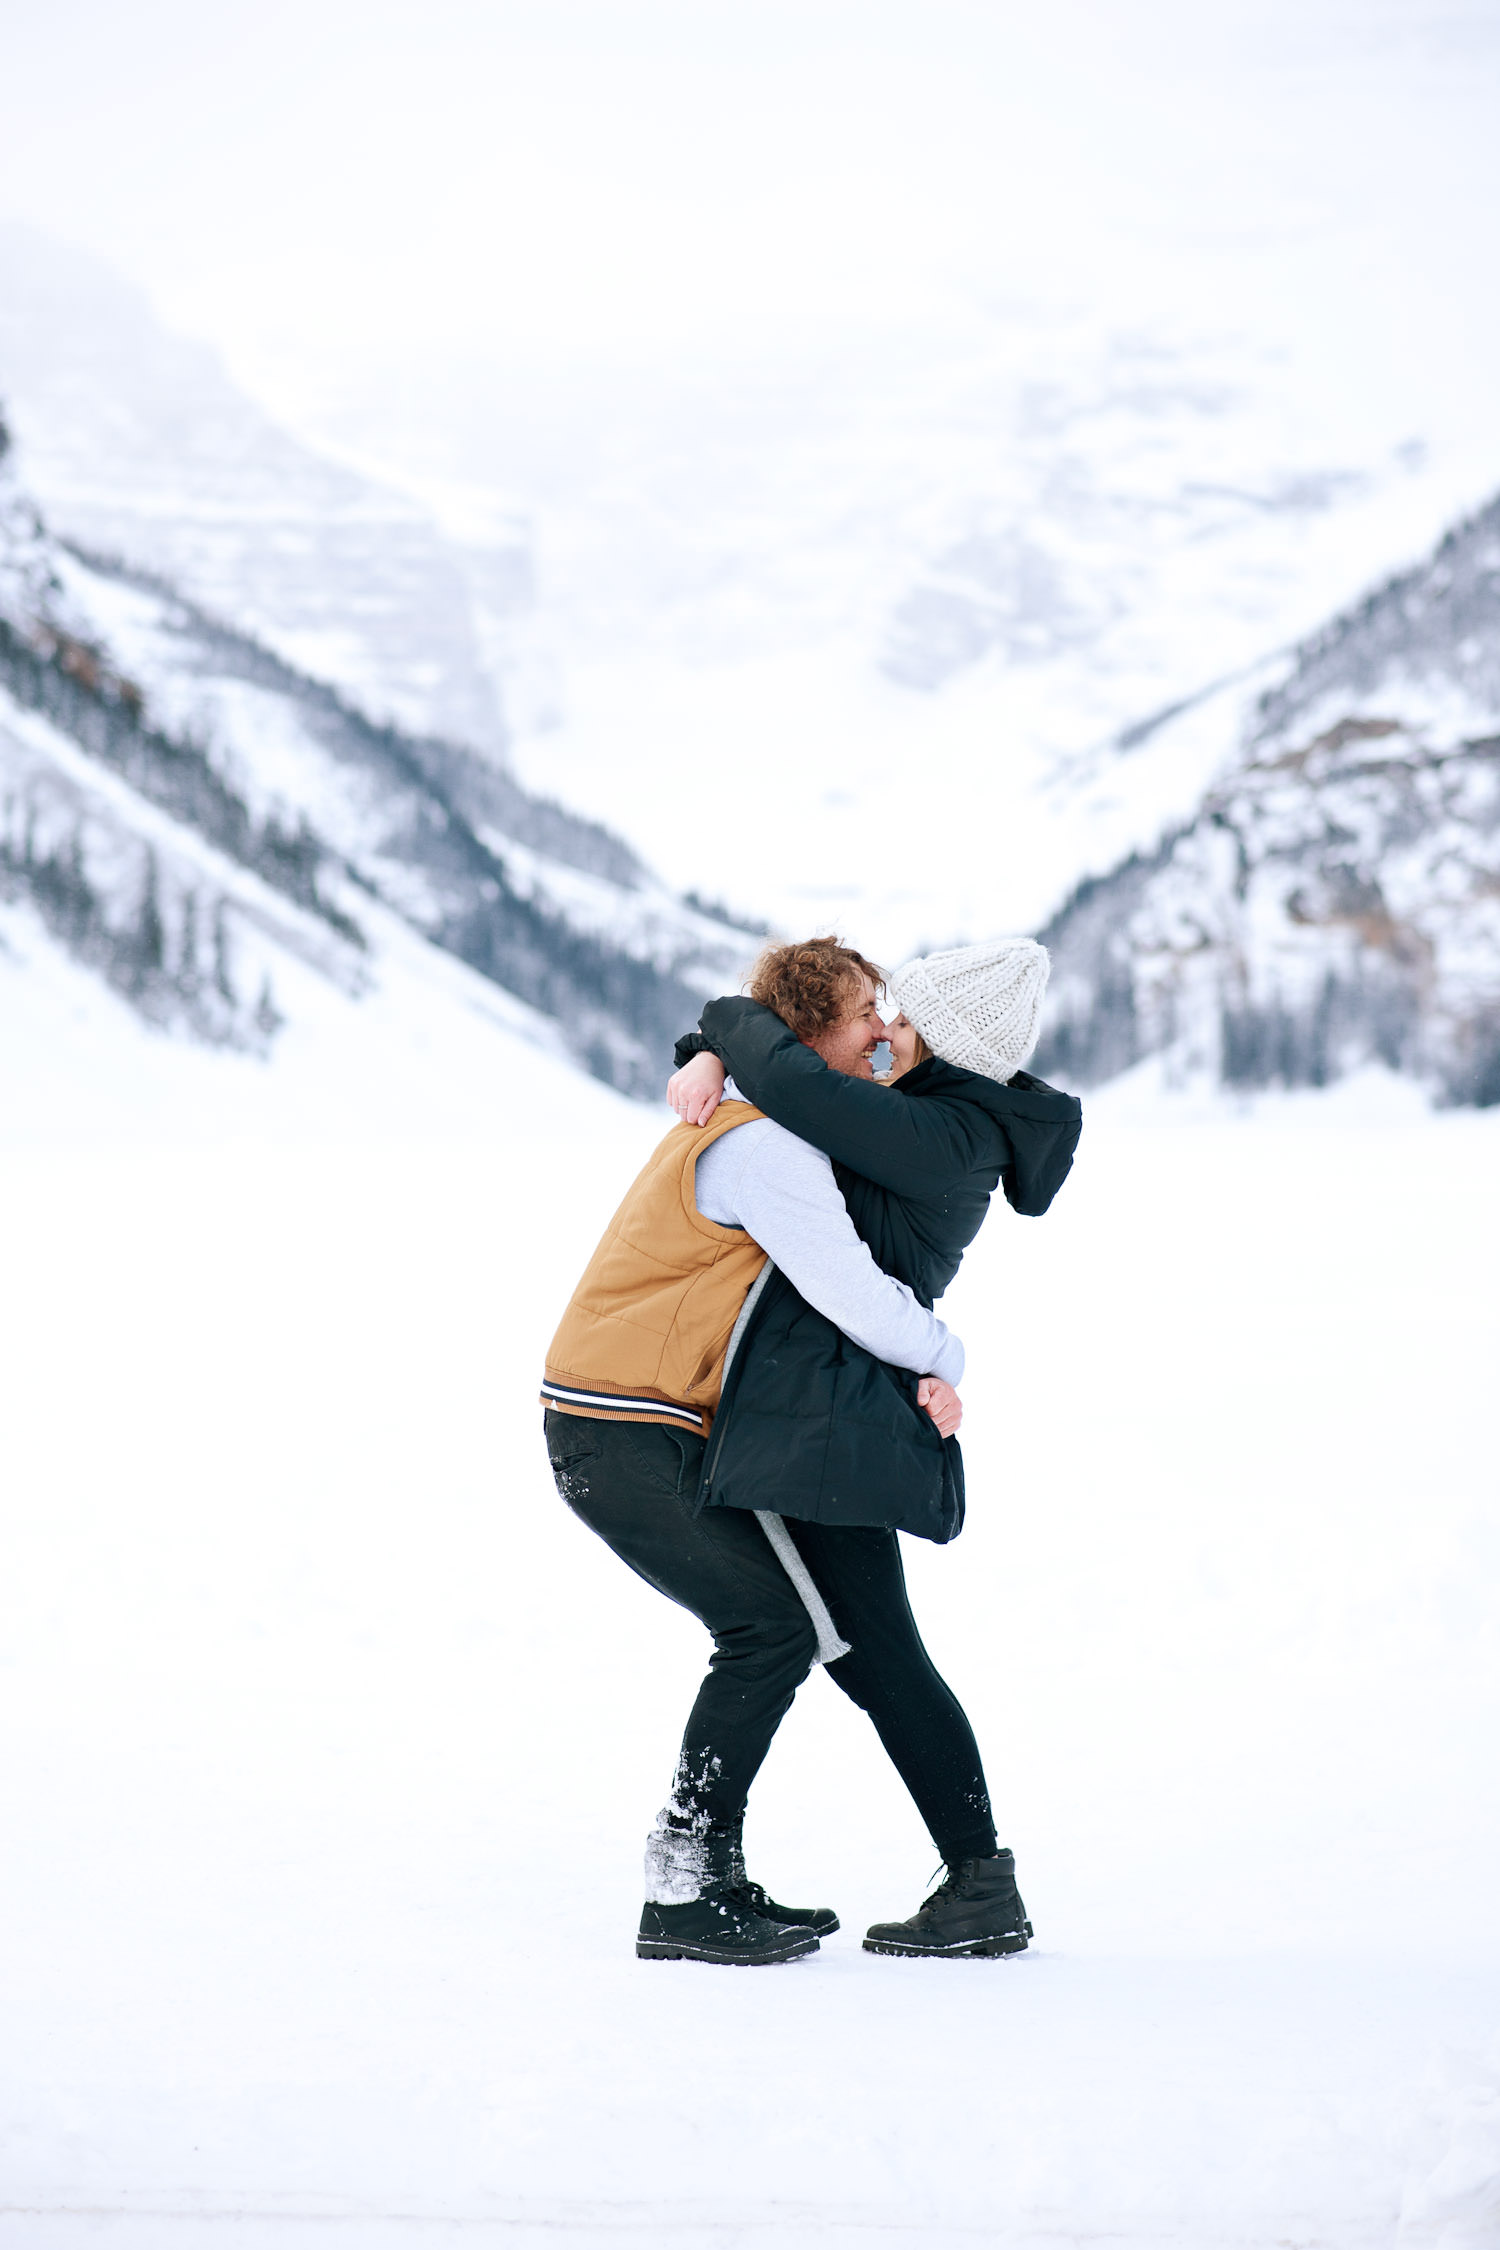 Lake Louise engagement session in Banff National Park captured by Tara Whittaker Photography